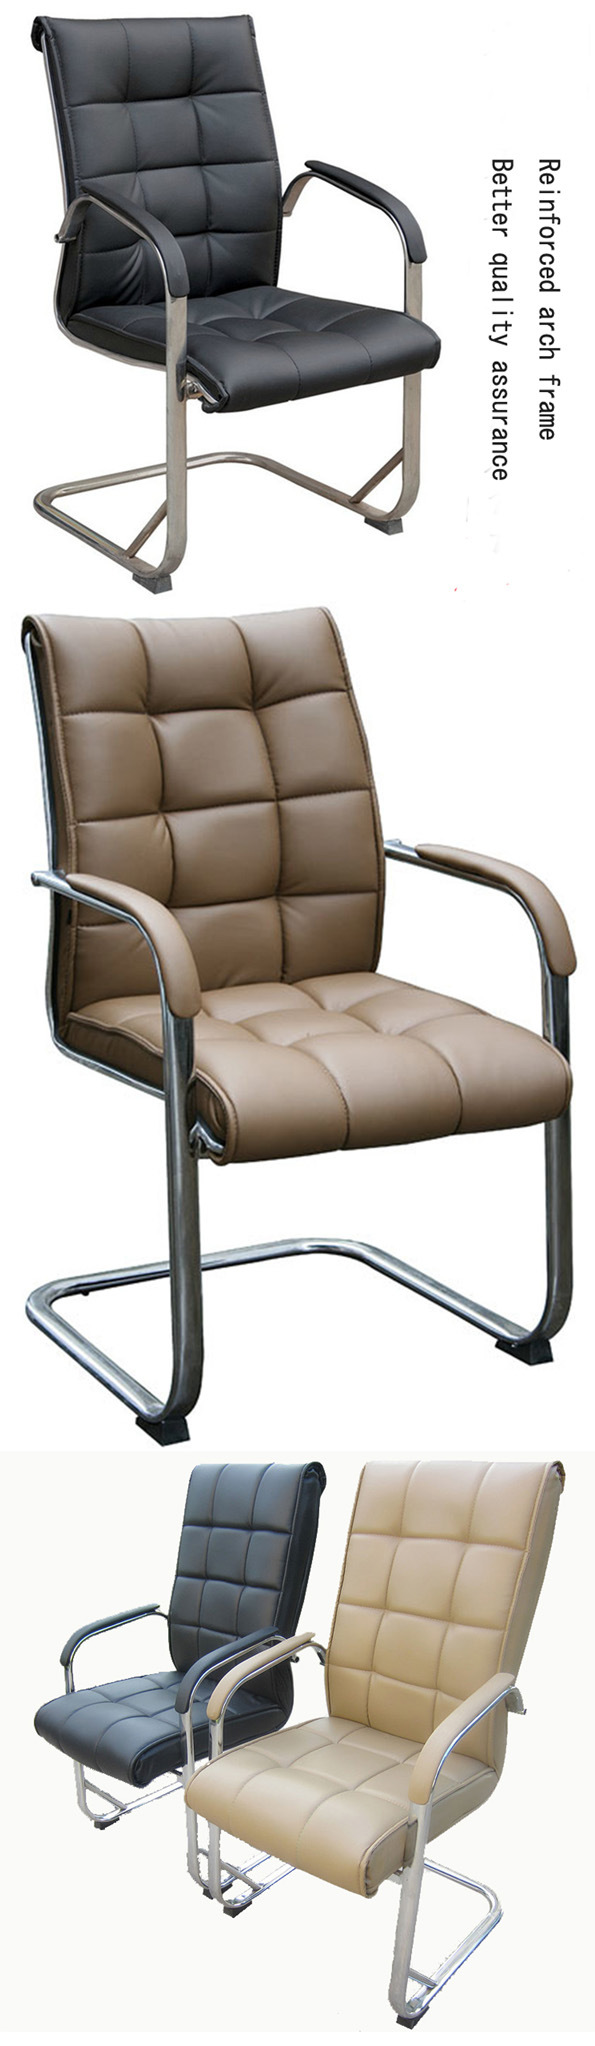 Staff Chair, Ergonomic Leather Office Chair (fy1112)